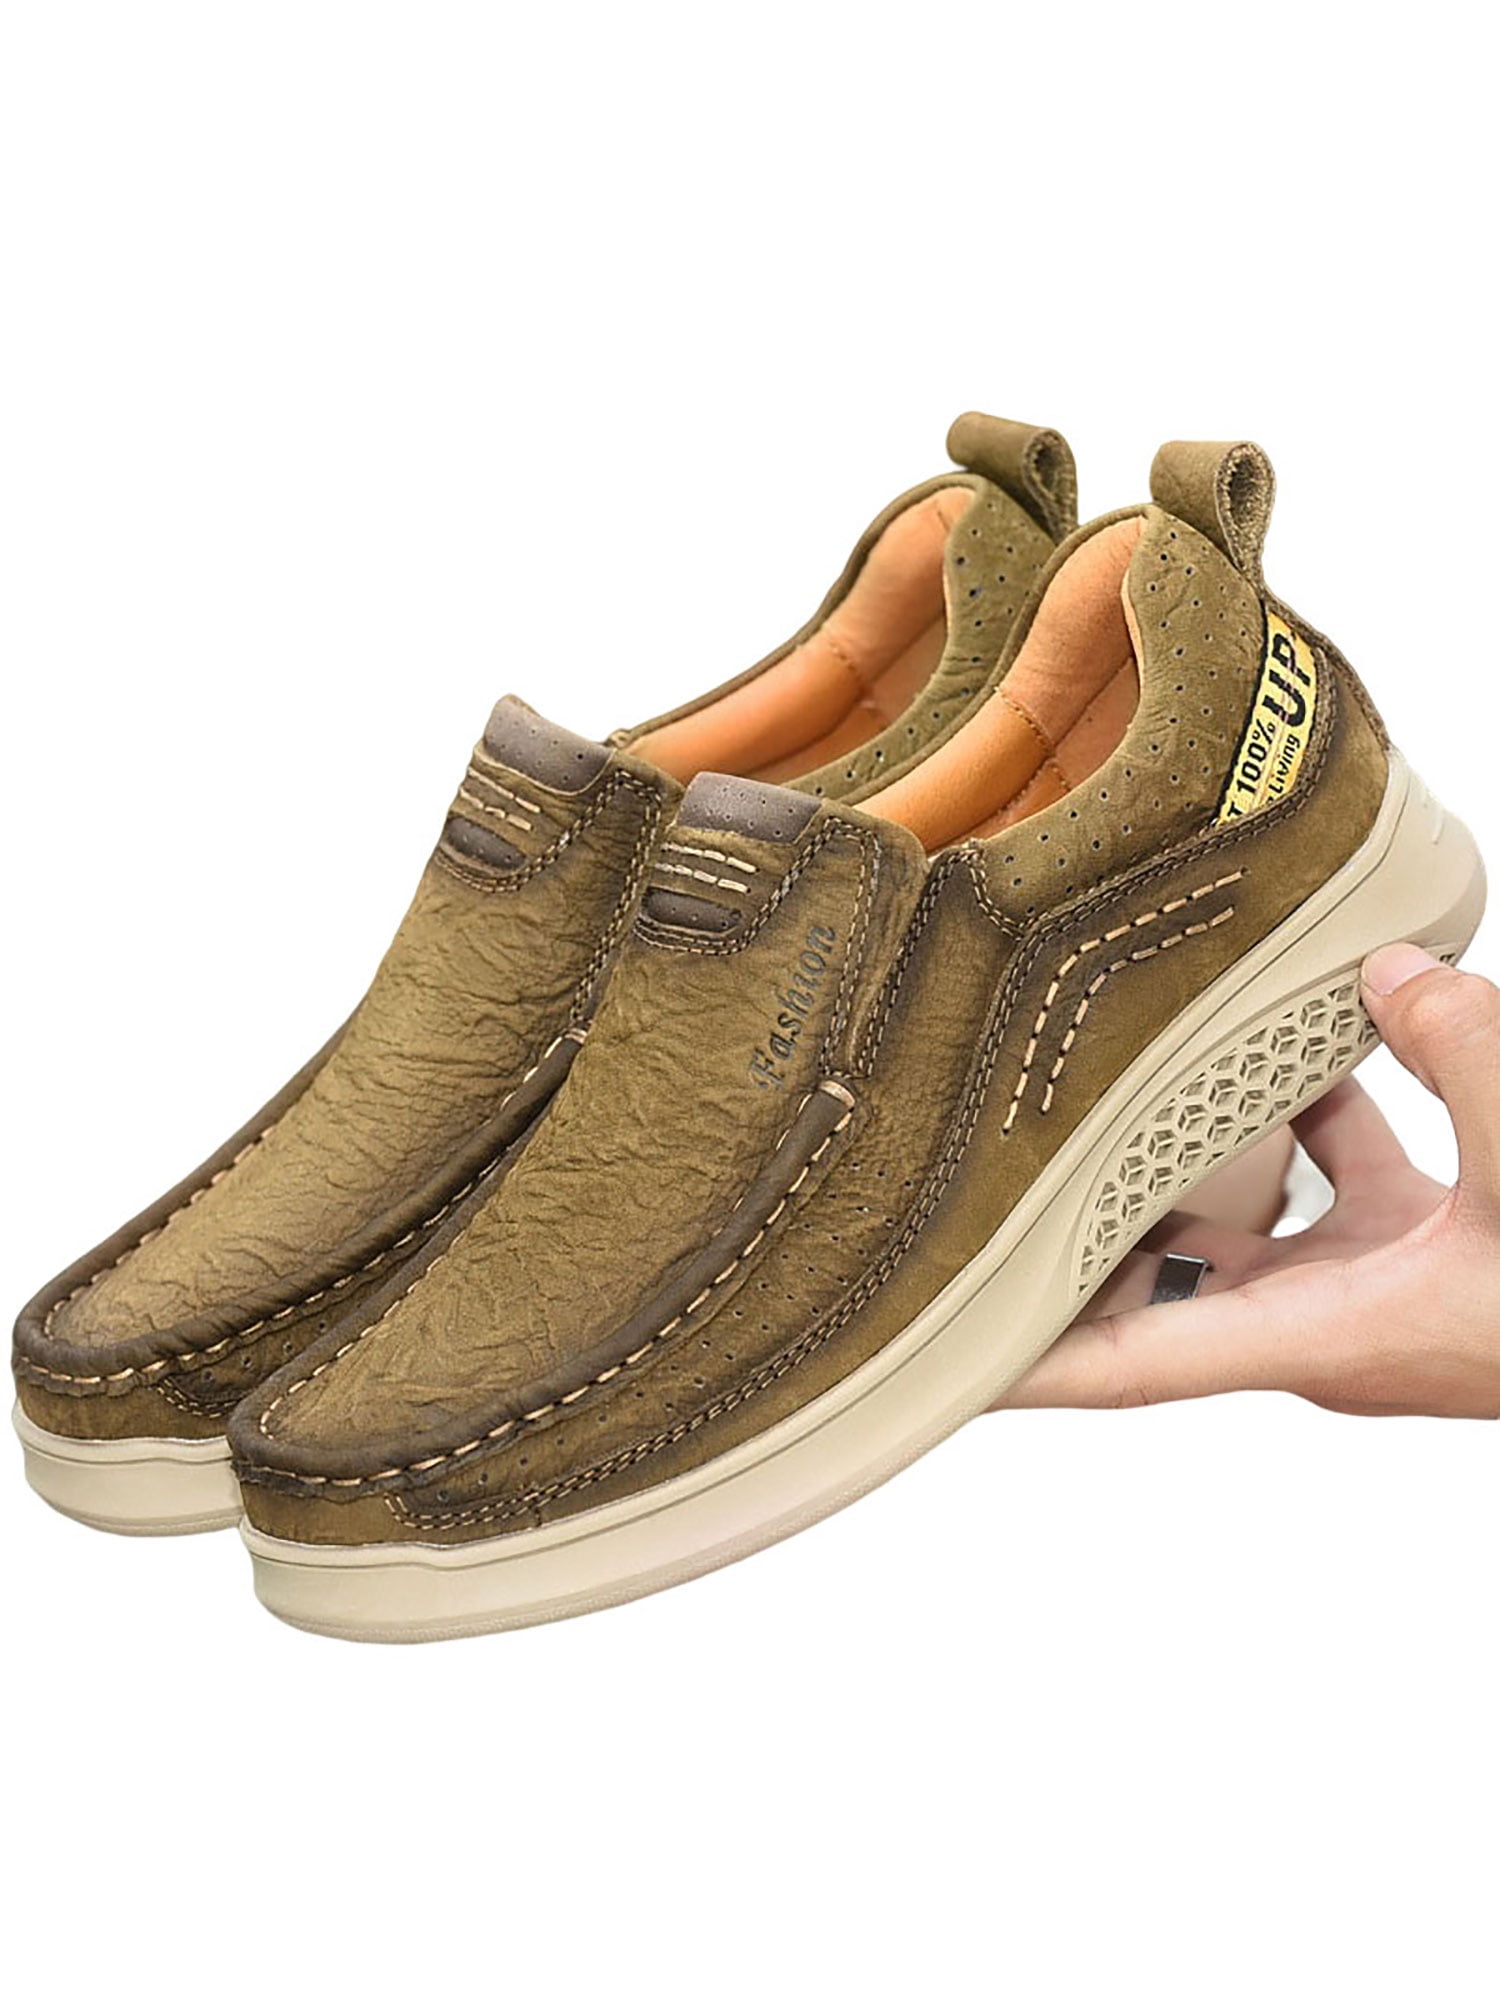 Mens Driving Shoes Casual Pull Leather Hollow Out Slip On Loafer Breath Outwear 